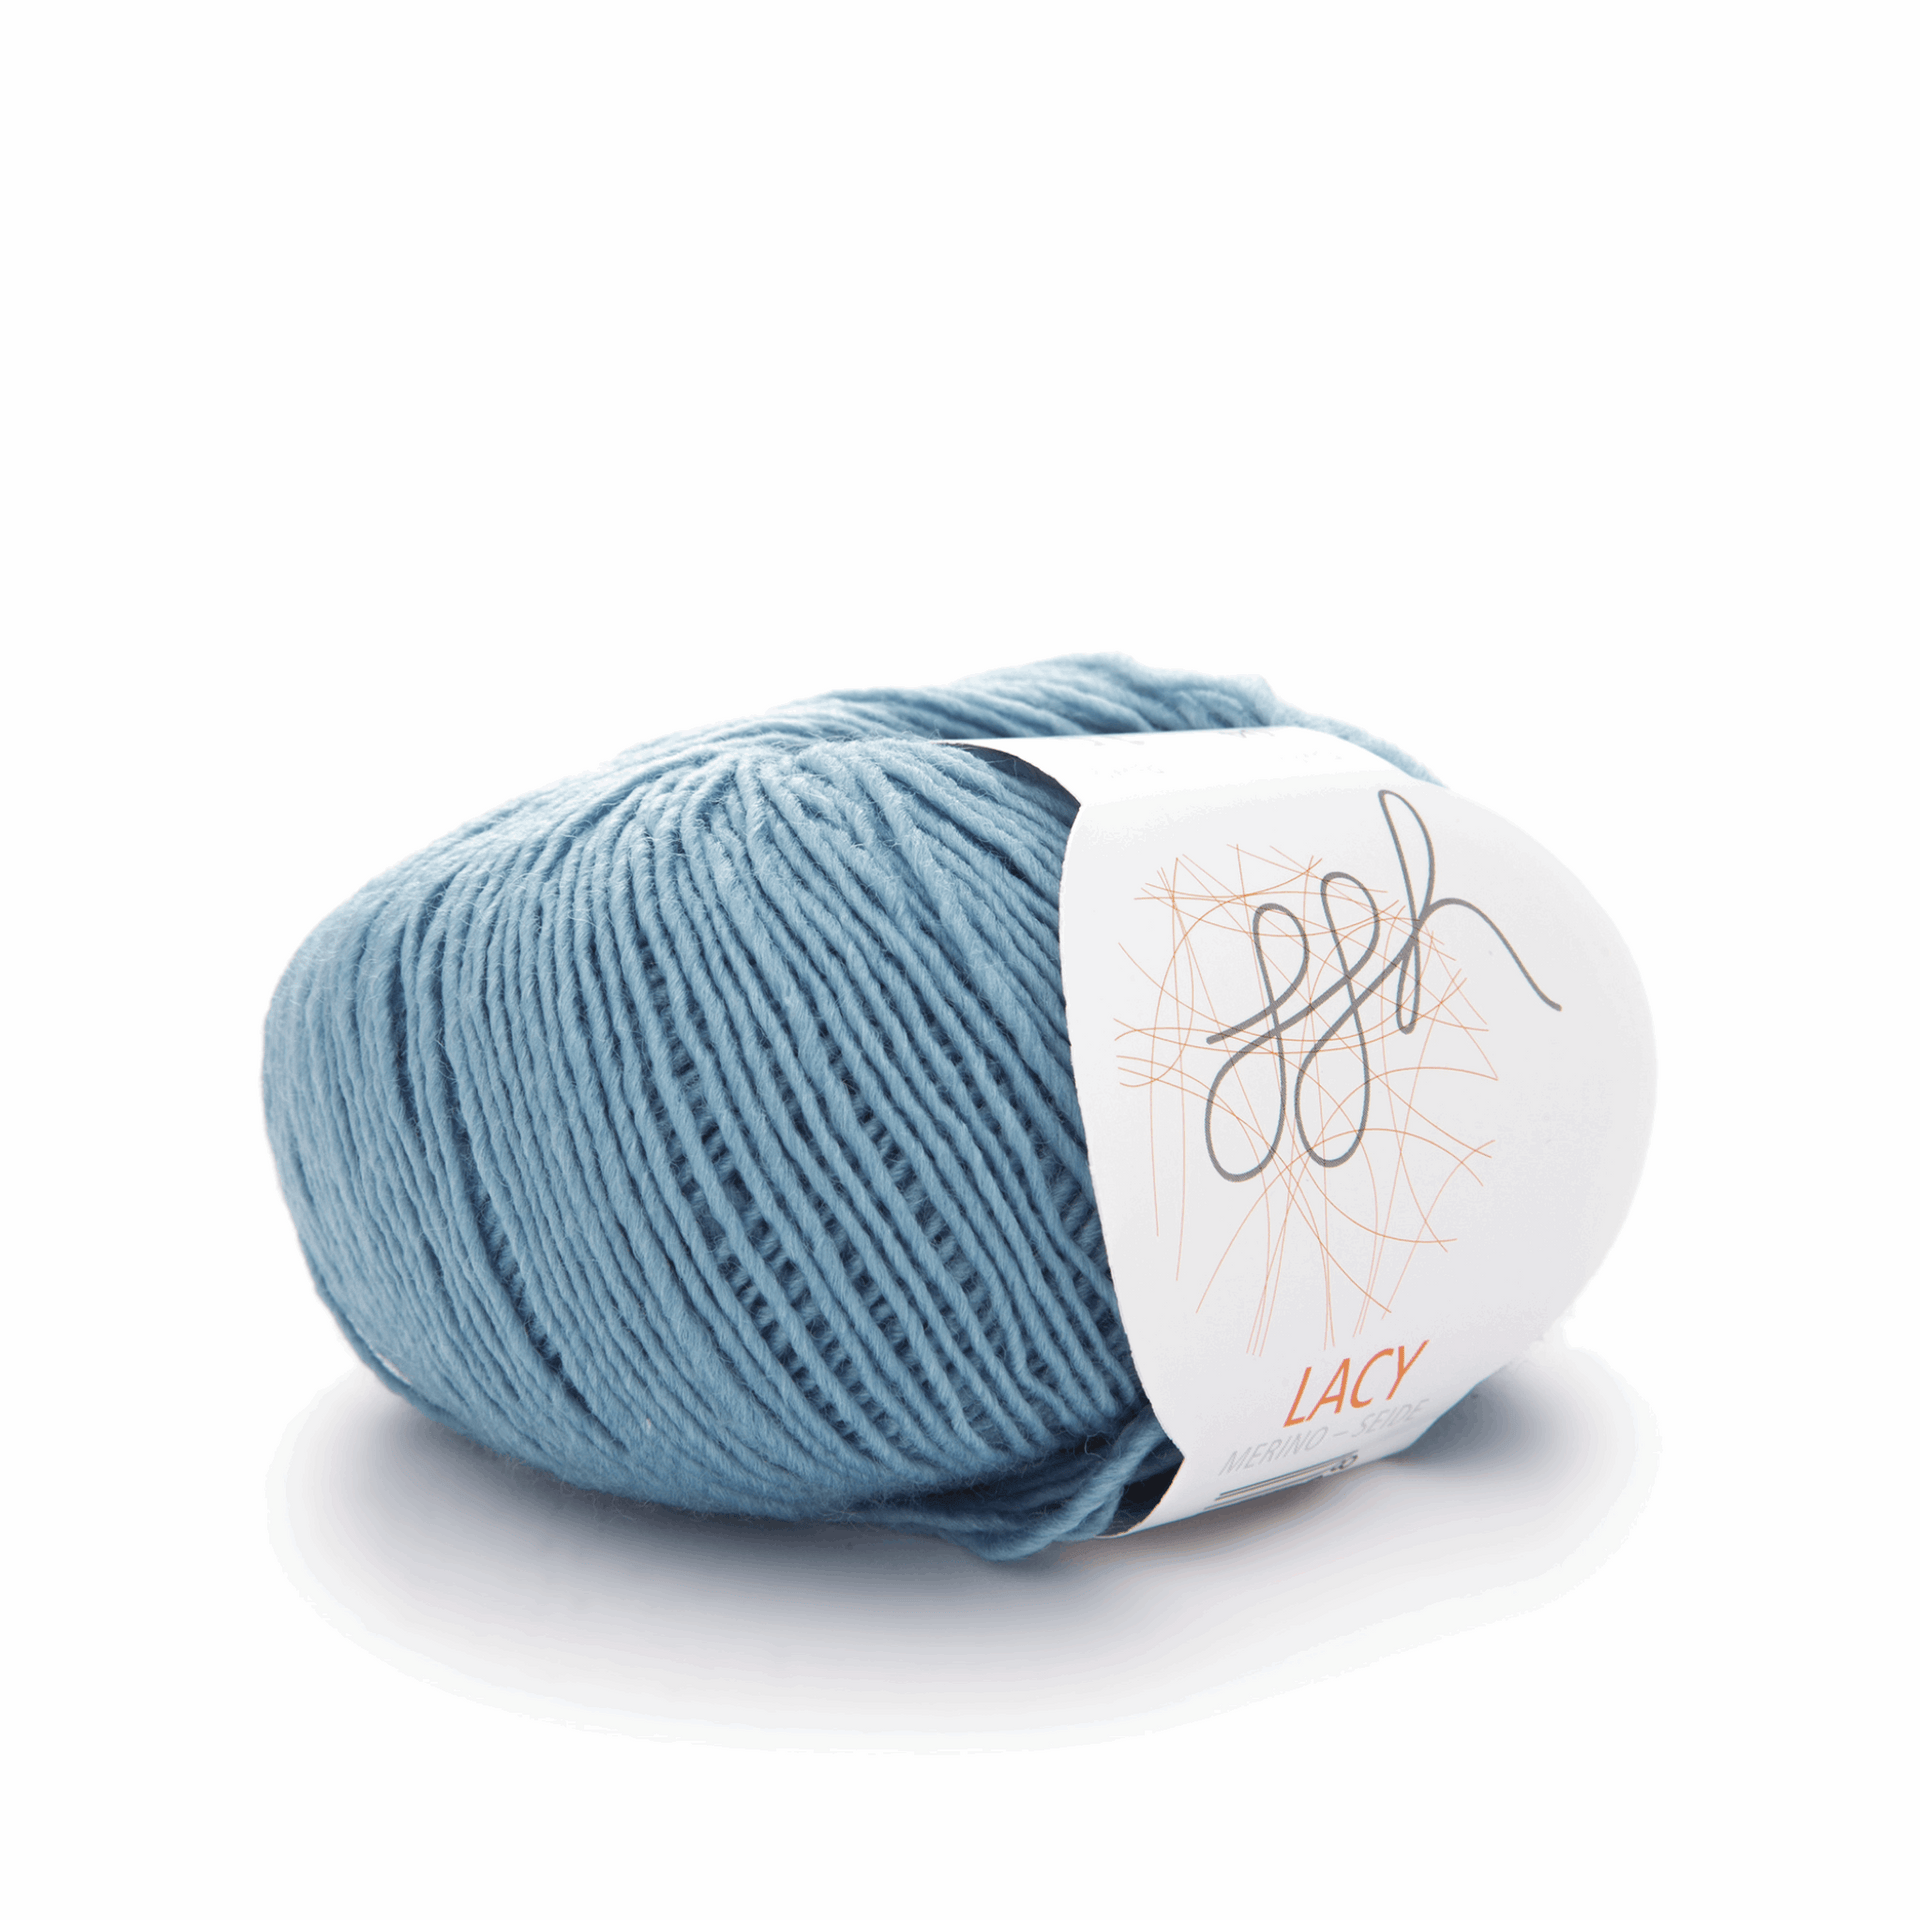 🧶Yarns and wool in a wide variety of colors! For example: GGH